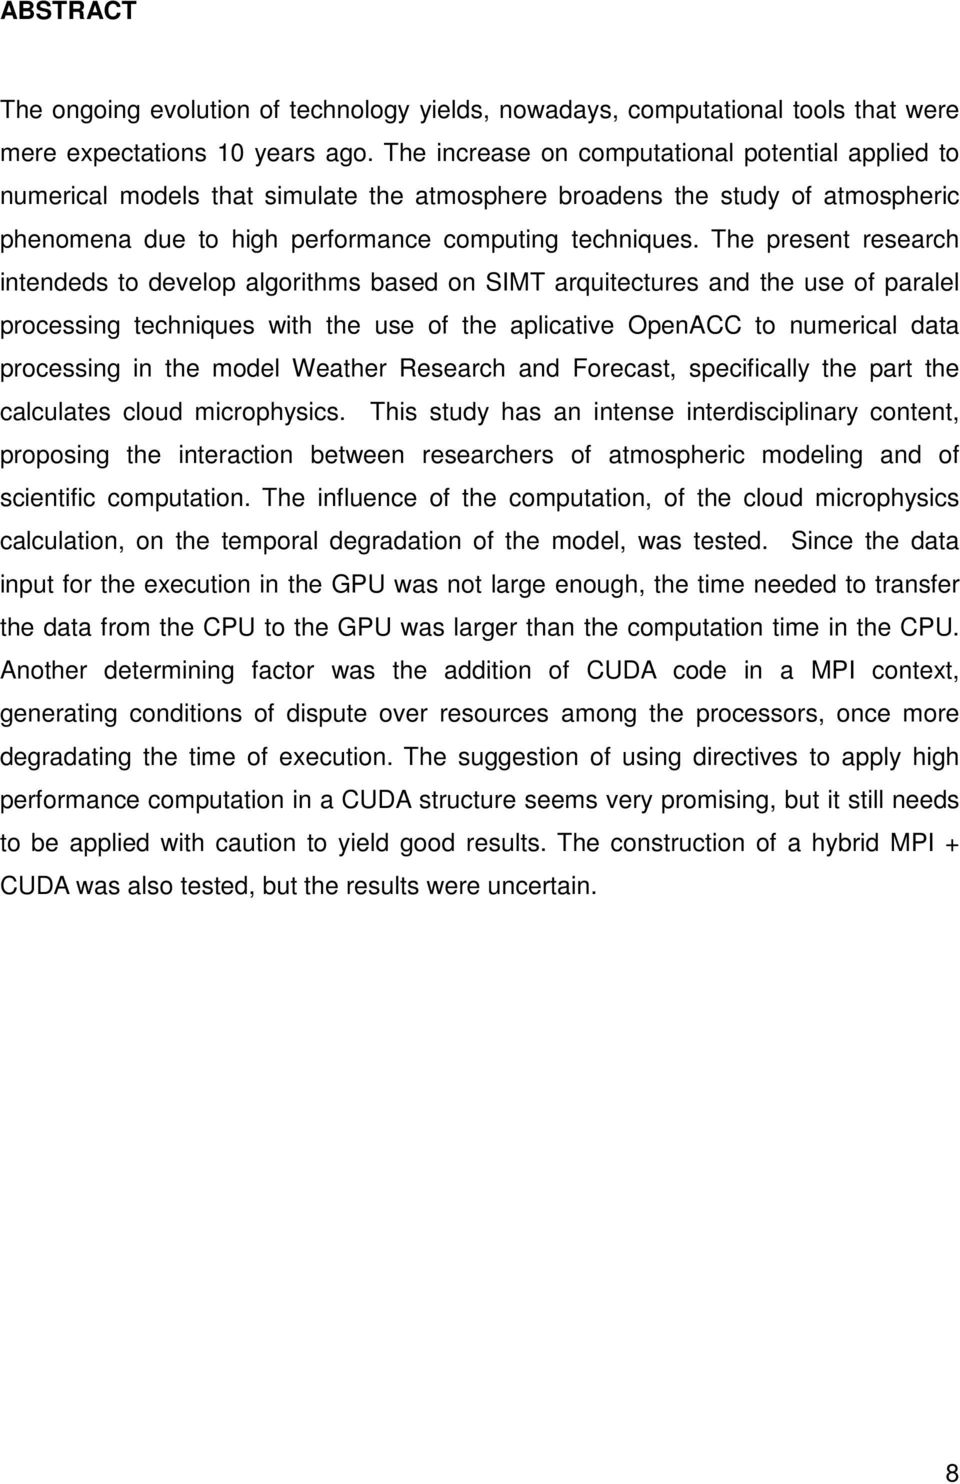 The present research intendeds to develop algorithms based on SIMT arquitectures and the use of paralel processing techniques with the use of the aplicative OpenACC to numerical data processing in